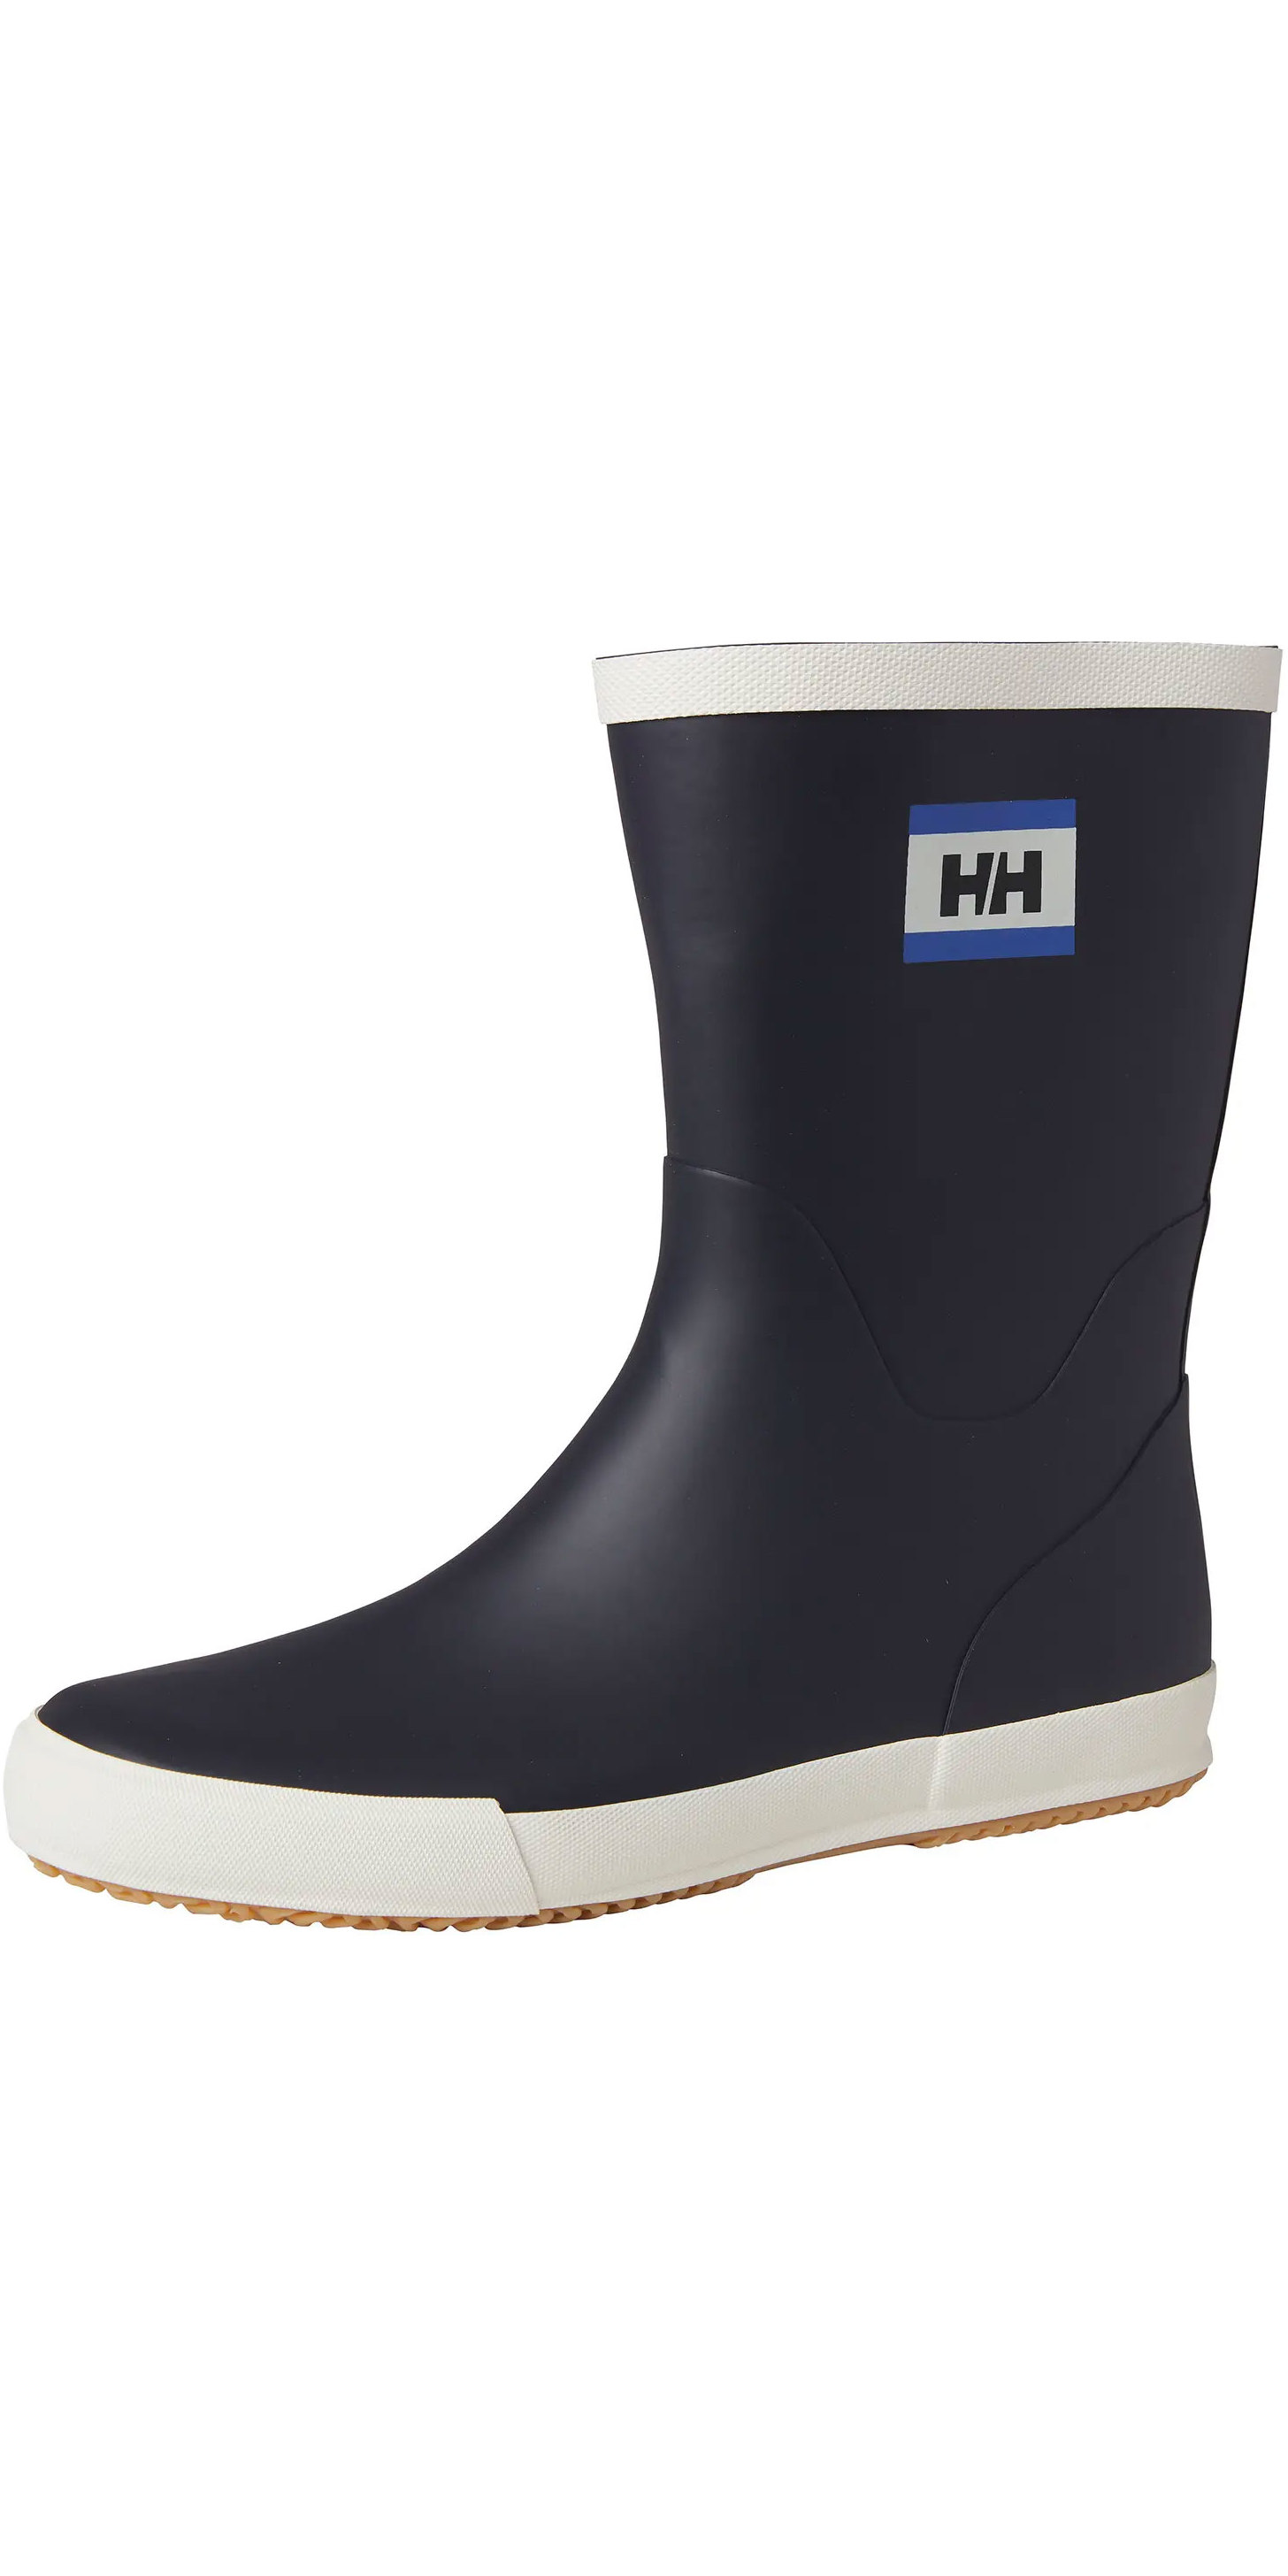 Blue Helly Hansen Nordvik 2 Lightweight Wellies in Navy Blue Womens Shoes Boots Ankle boots 